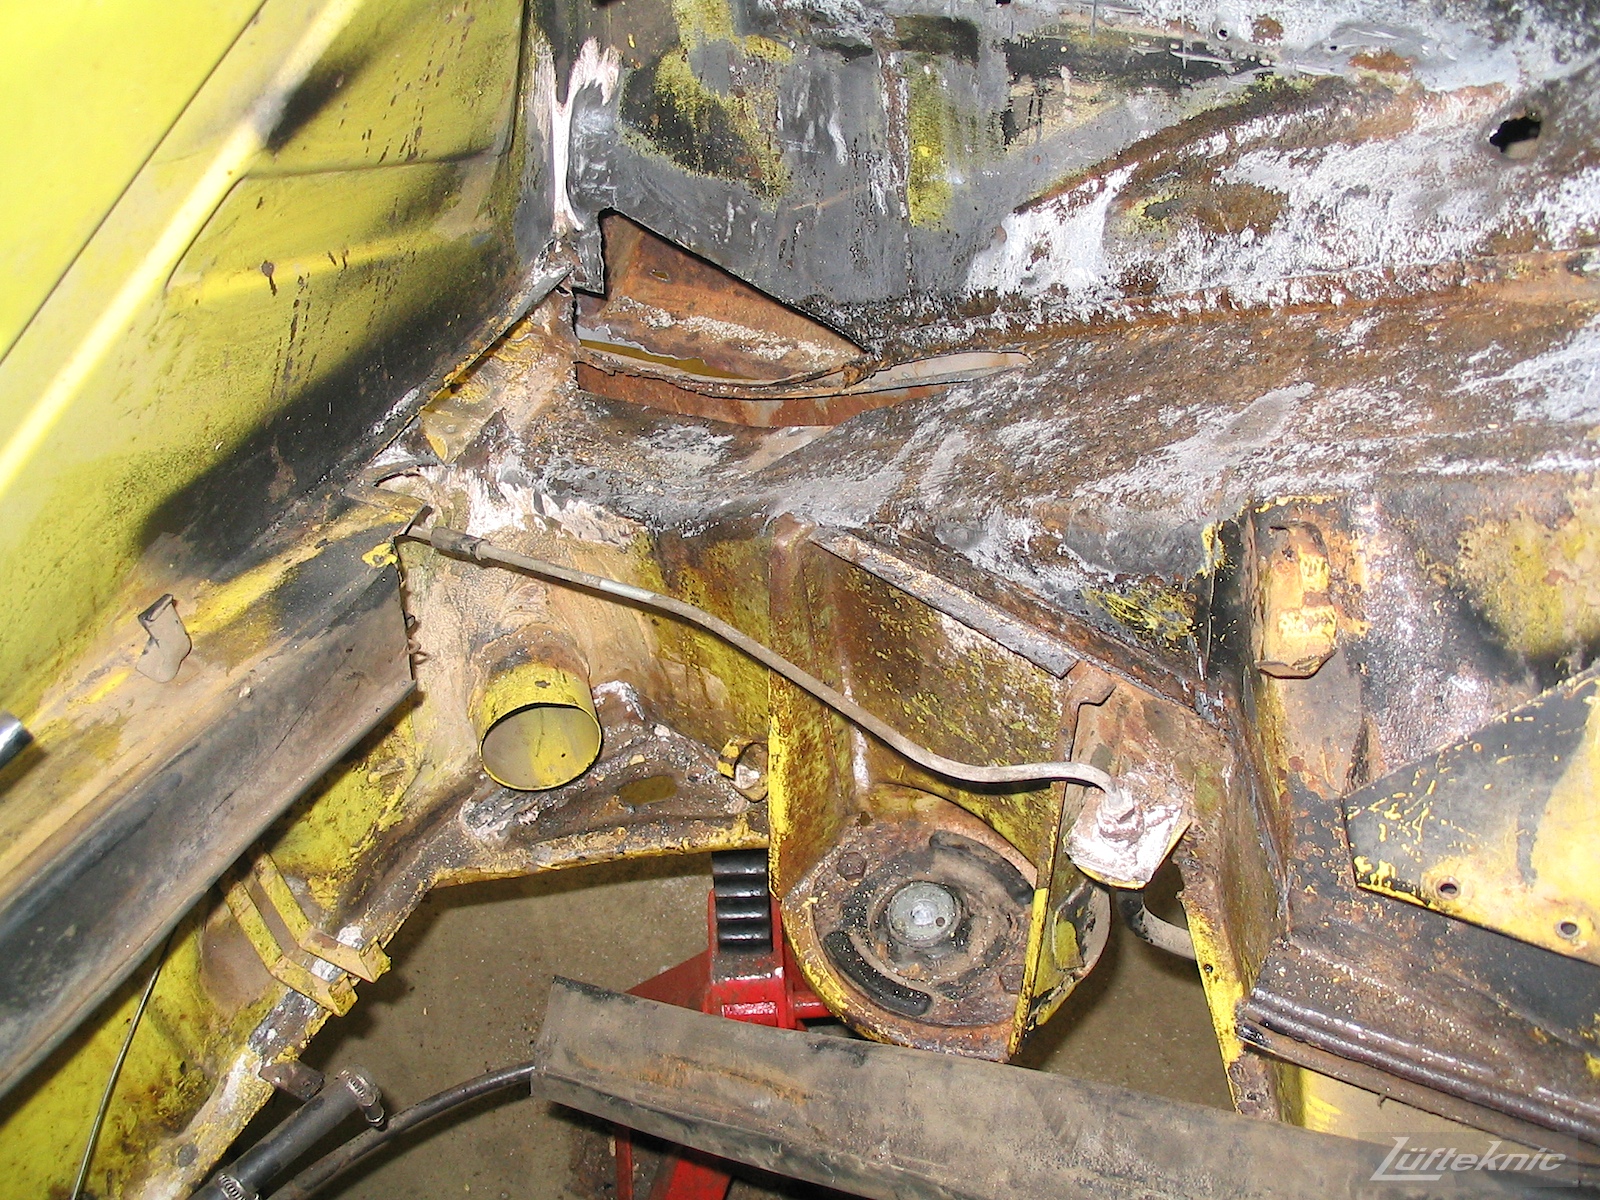 Significant rust damage on the chassis of a yellow Porsche 914.